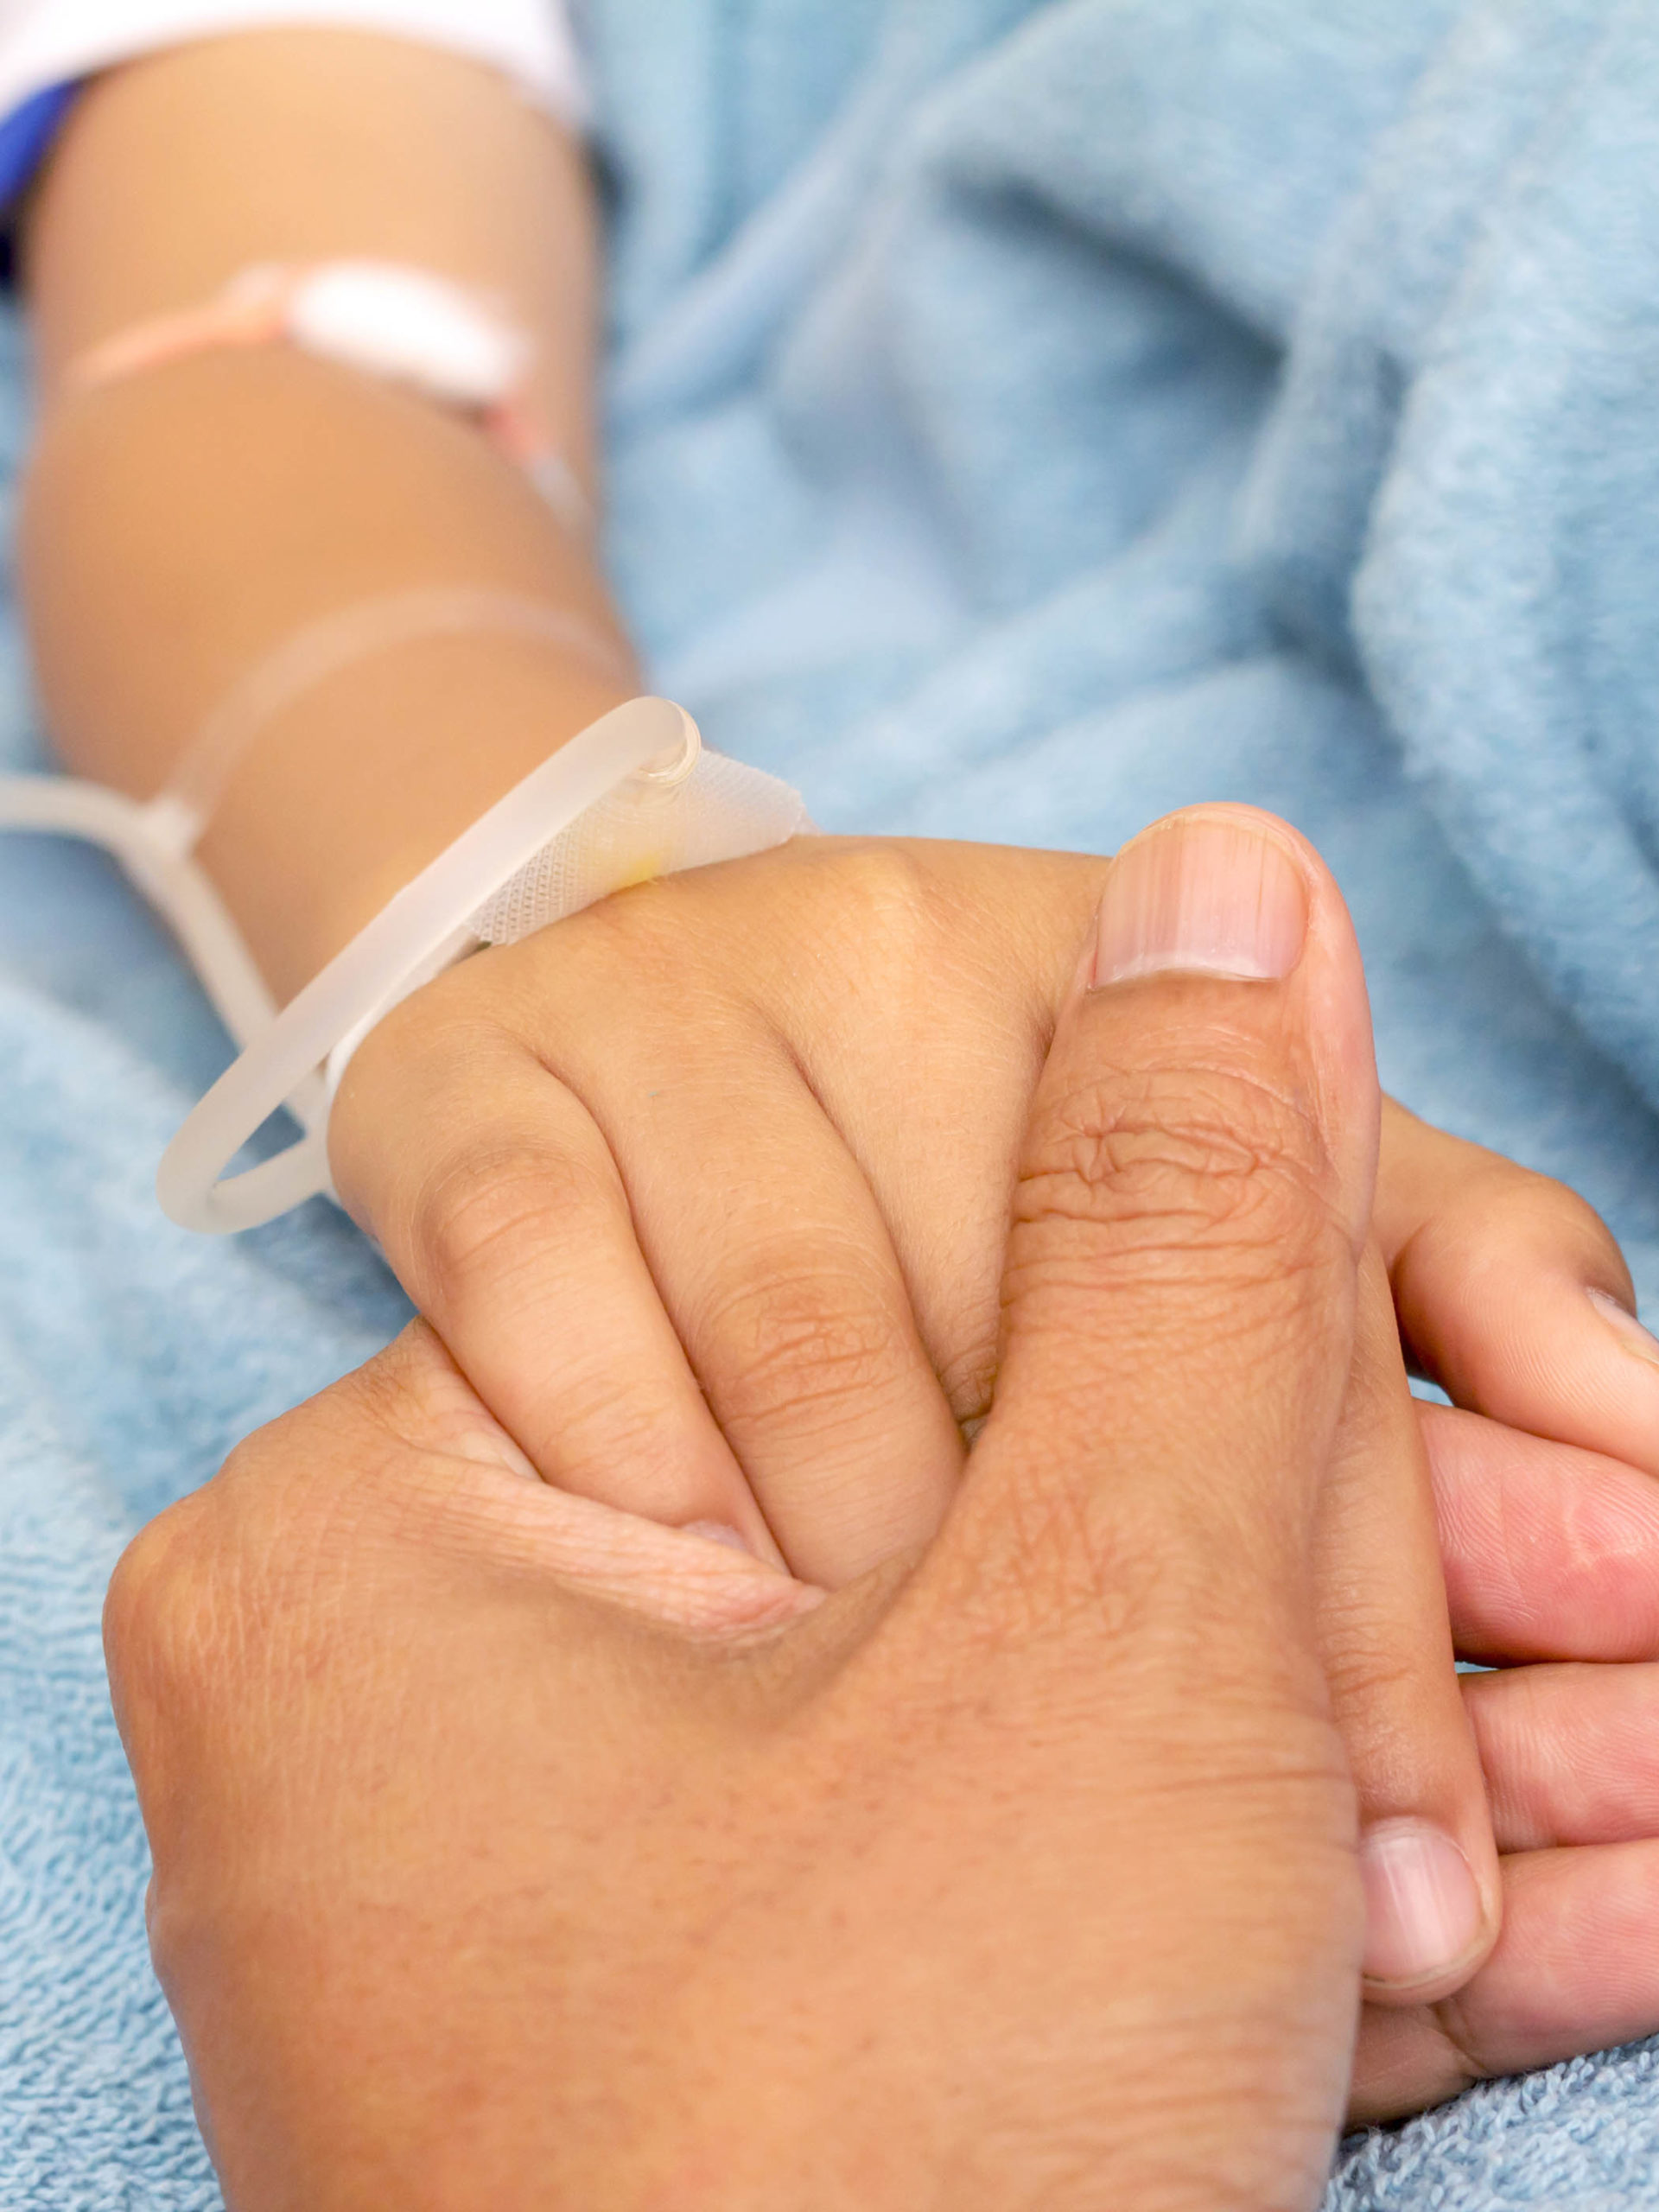 parent holding child's hand in hospital bed with IV solution in a child's patients hand